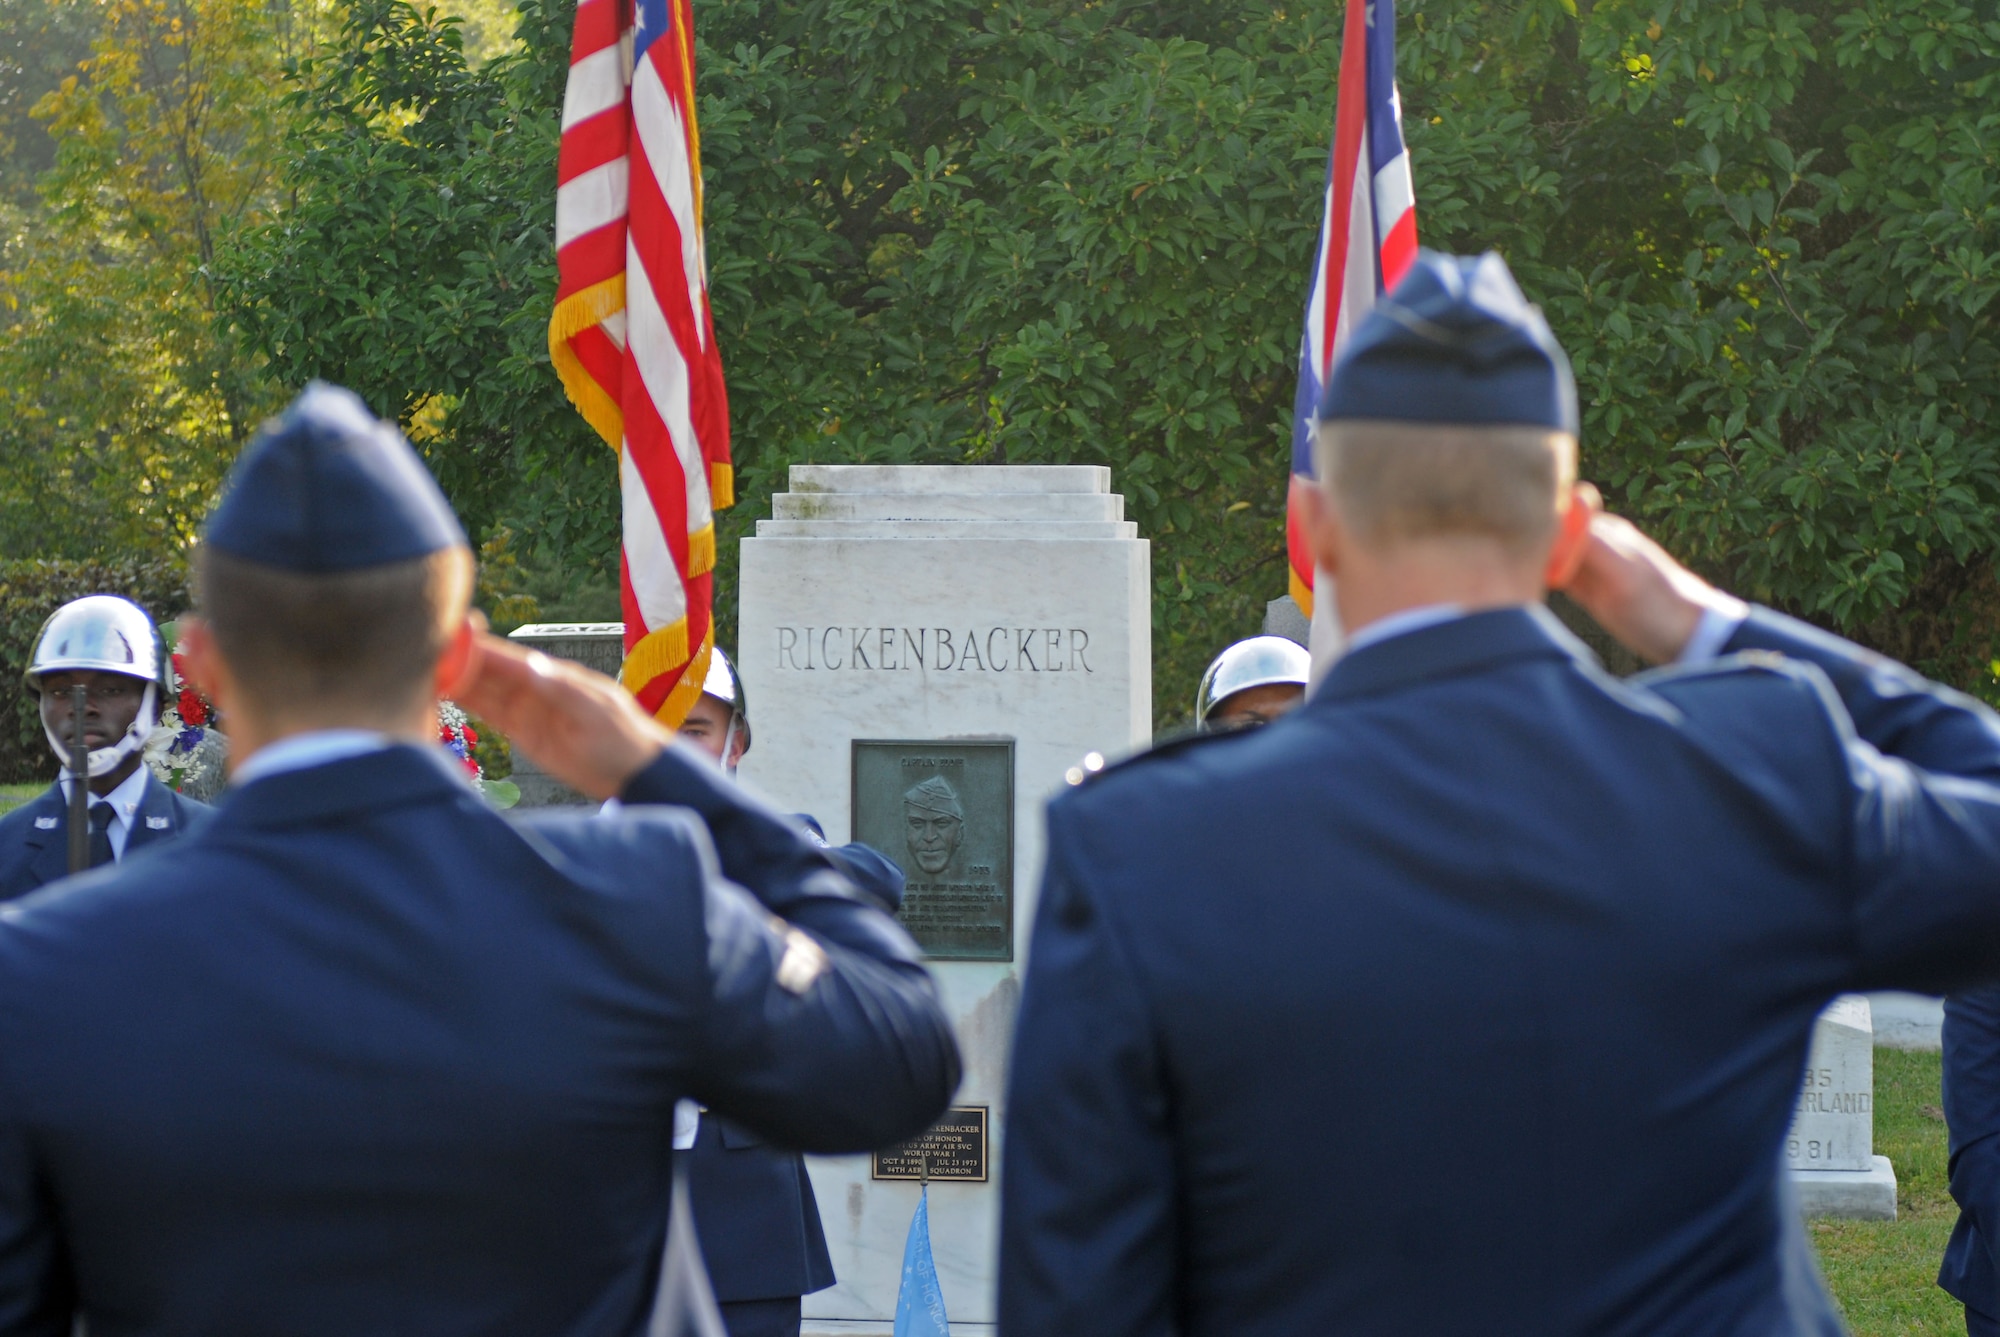 U.S. Airmen with the 121st Air Refueling Wing, along with members of the Columbus Downtown High School Jr. ROTC and the Rickenbacker-Woods Foundation, join together to celebrate the 125th birthday of Capt. Eddie Rickenbacker Oct. 8, 2015 at Green Lawn Cemetery, Columbus, Ohio. October 8 has officially been named by The Franklin County Board of Commissioners as “Captain Eddie Rickenbacker Day” for the City of Columbus. (U.S. Air National Guard photo by Airman 1st Class Ashley Williams/Released)
